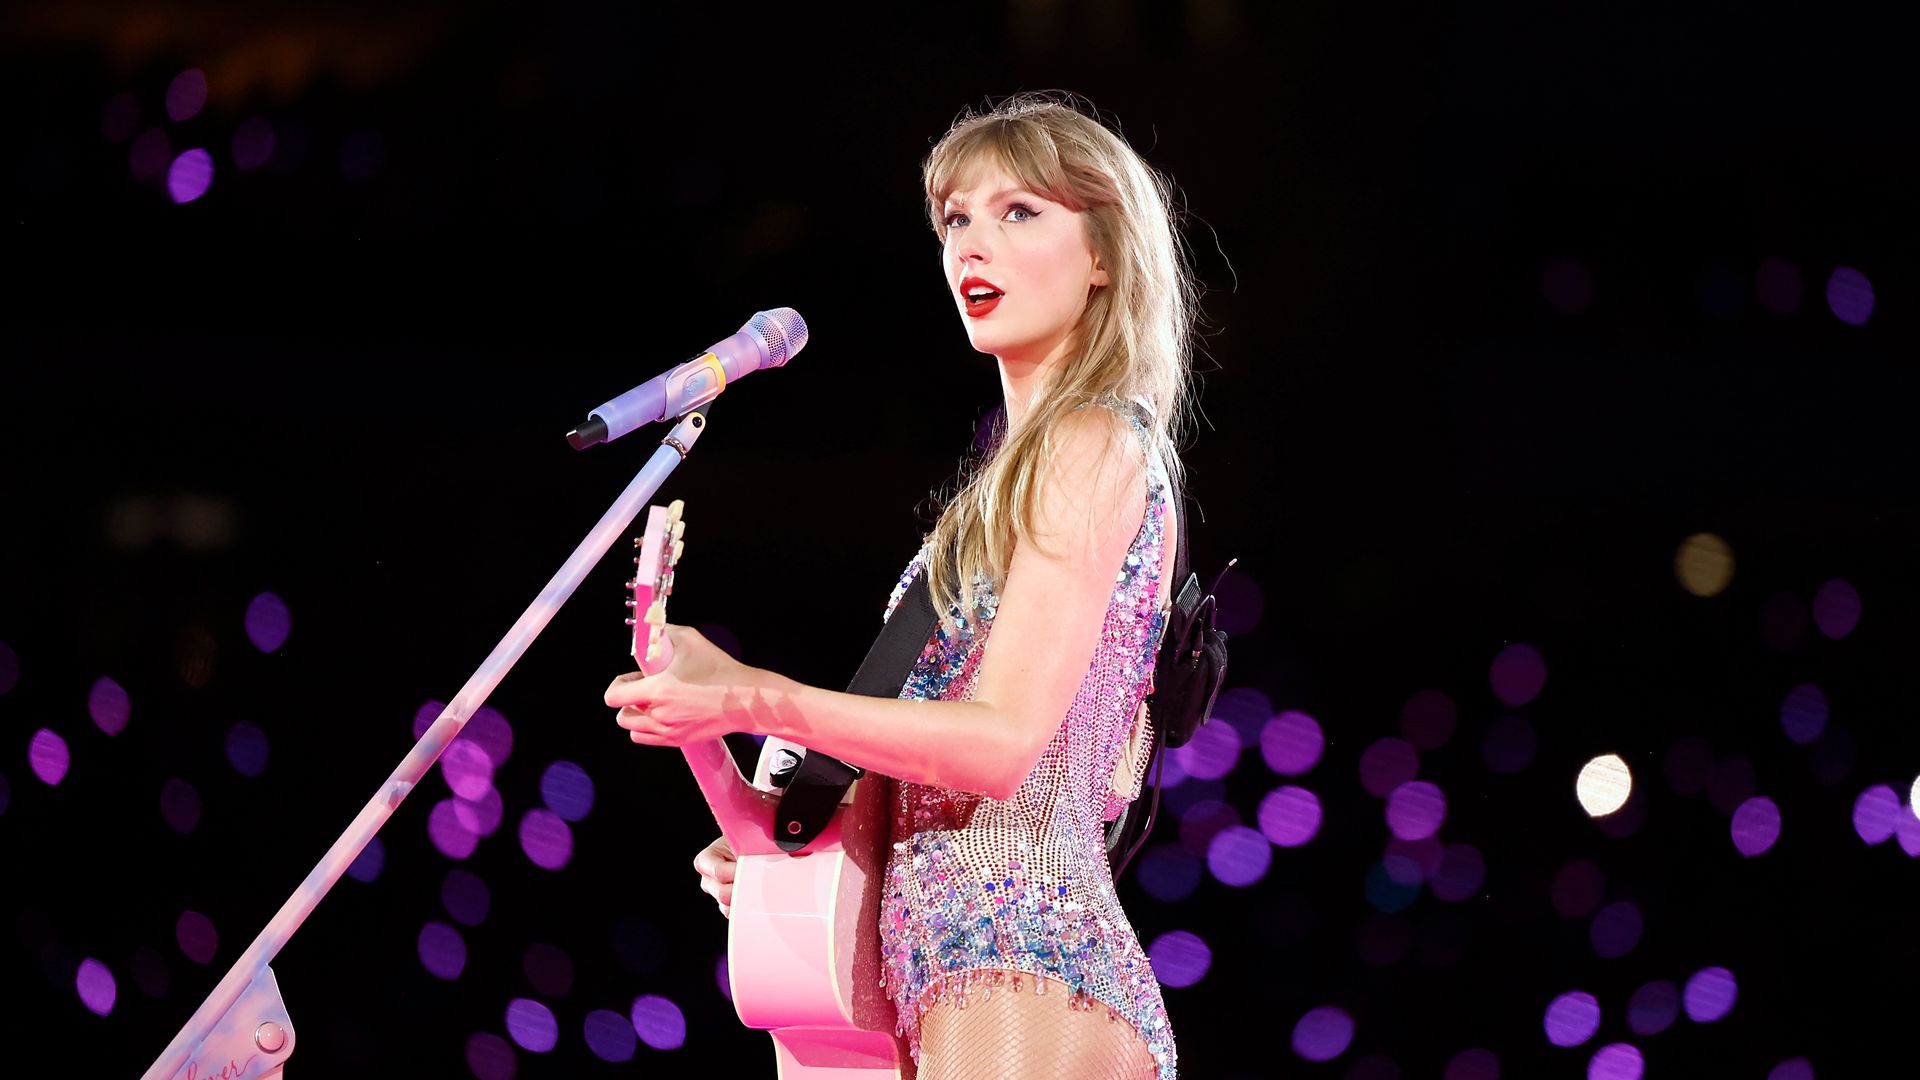 Taylor Swift playing guitar on stage in a glittering bodysuit